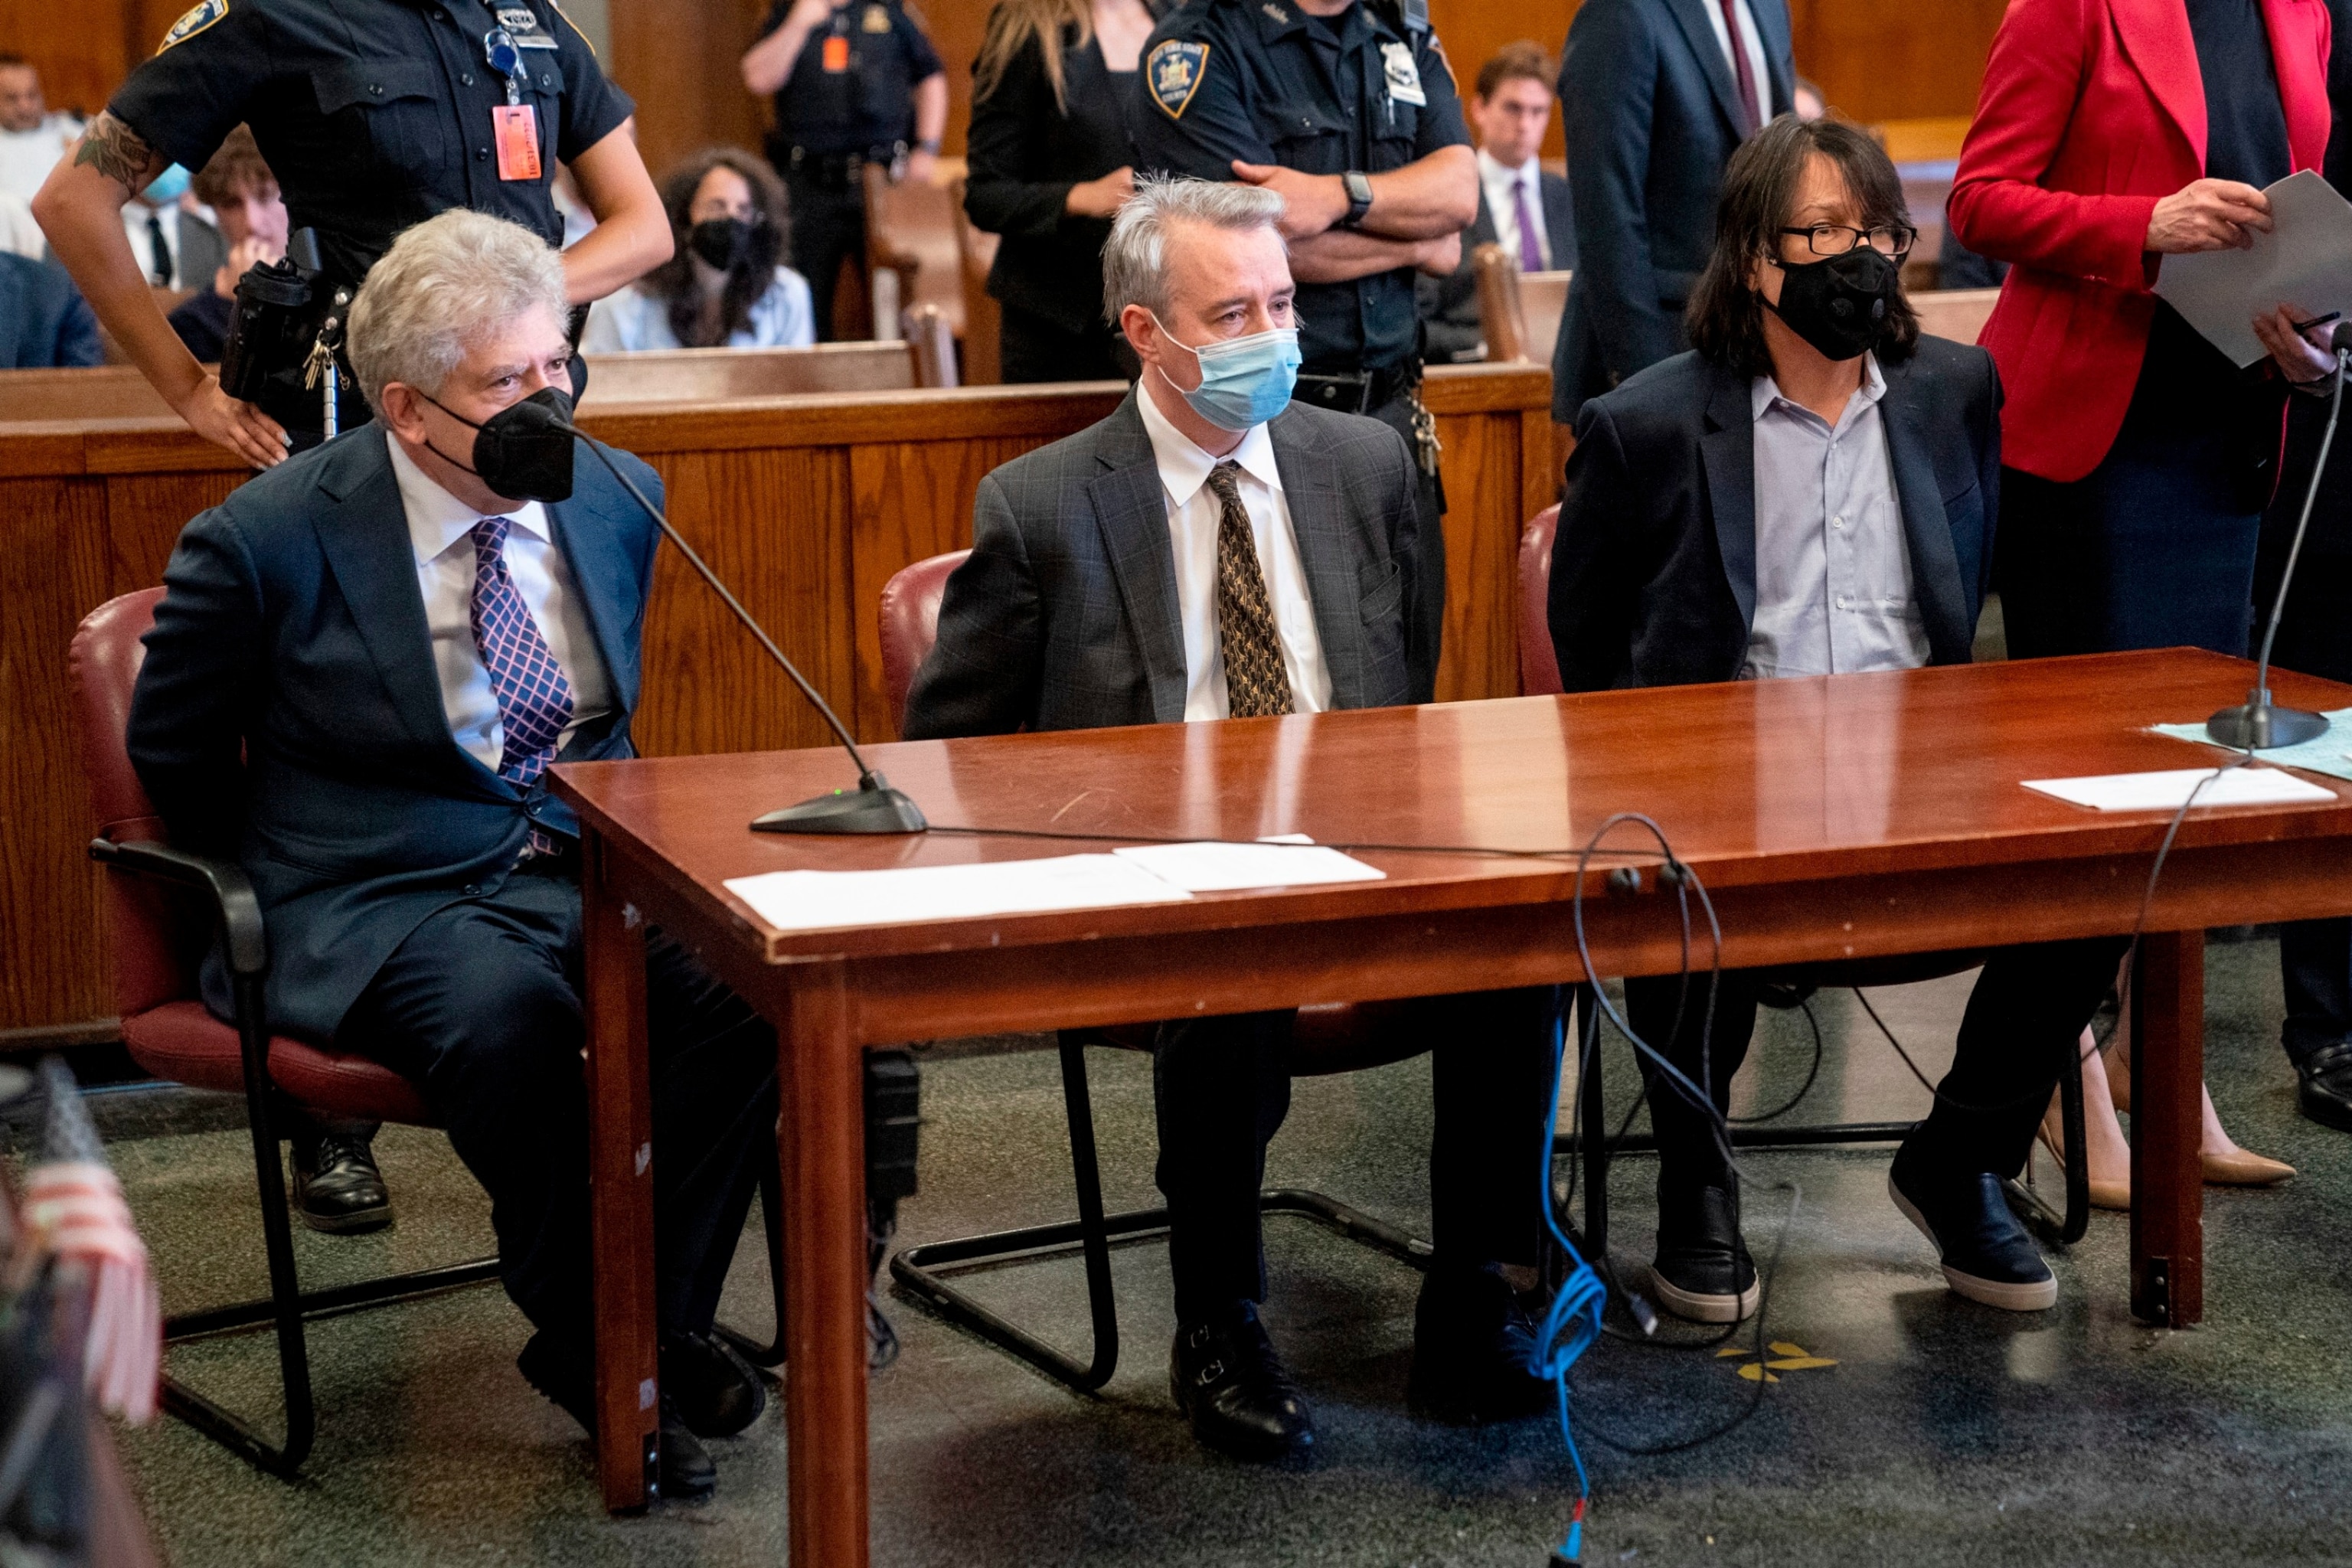 PHOTO: From left, Glenn Horowitz, Craig Inciardi and Edward Kosinski appear in criminal court after being indicted for conspiracy involving handwritten notes from the famous Eagles album "Hotel California," July 12, 2022, in New York.